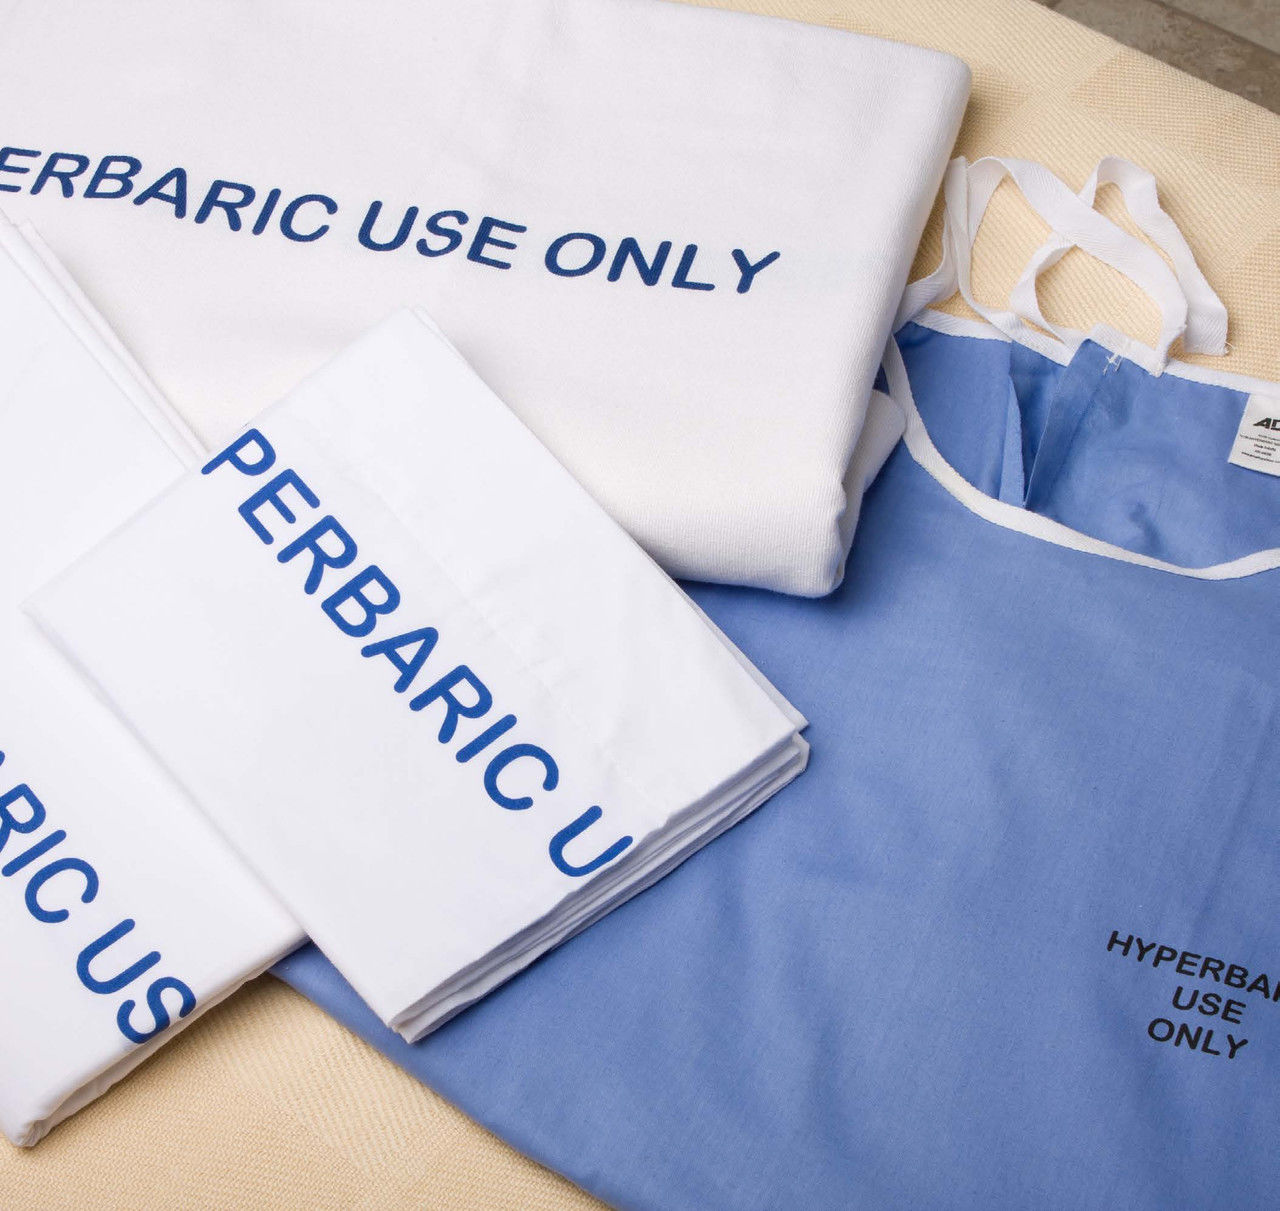 How do these Bed Sheets ensure safety and hygiene in hyperbaric environments?